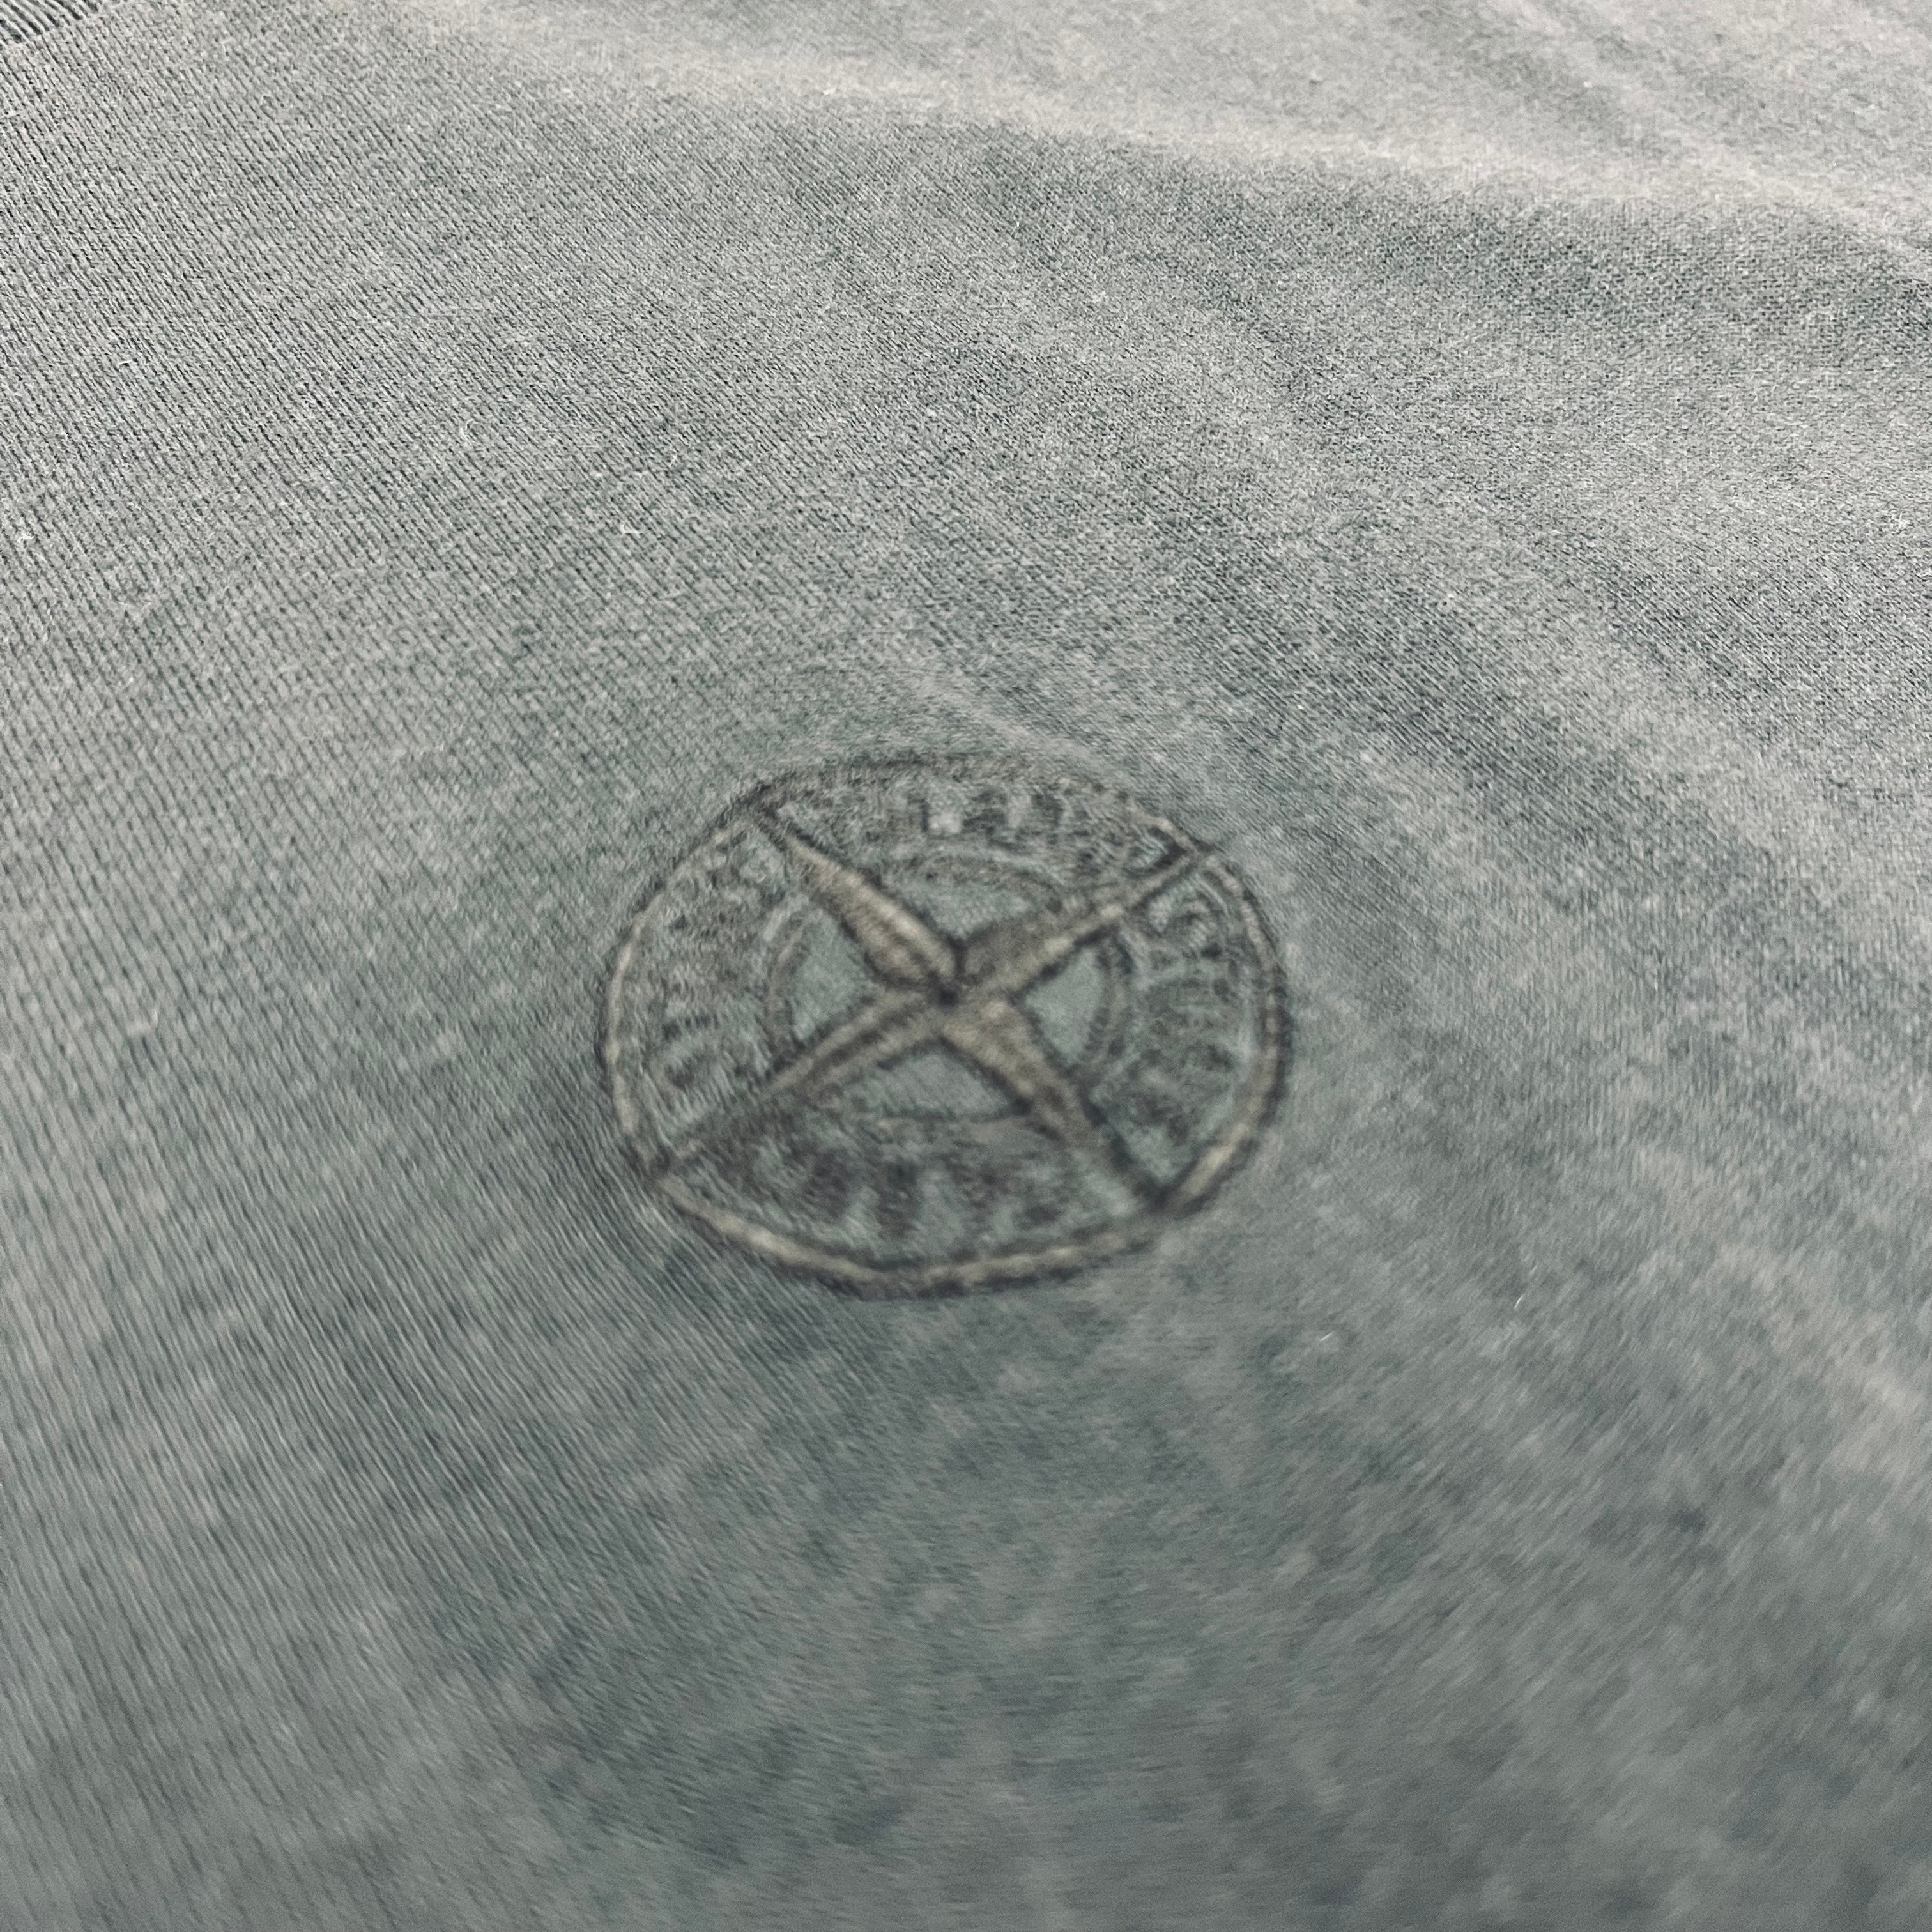 Stone Island Embroidered T-Shirt